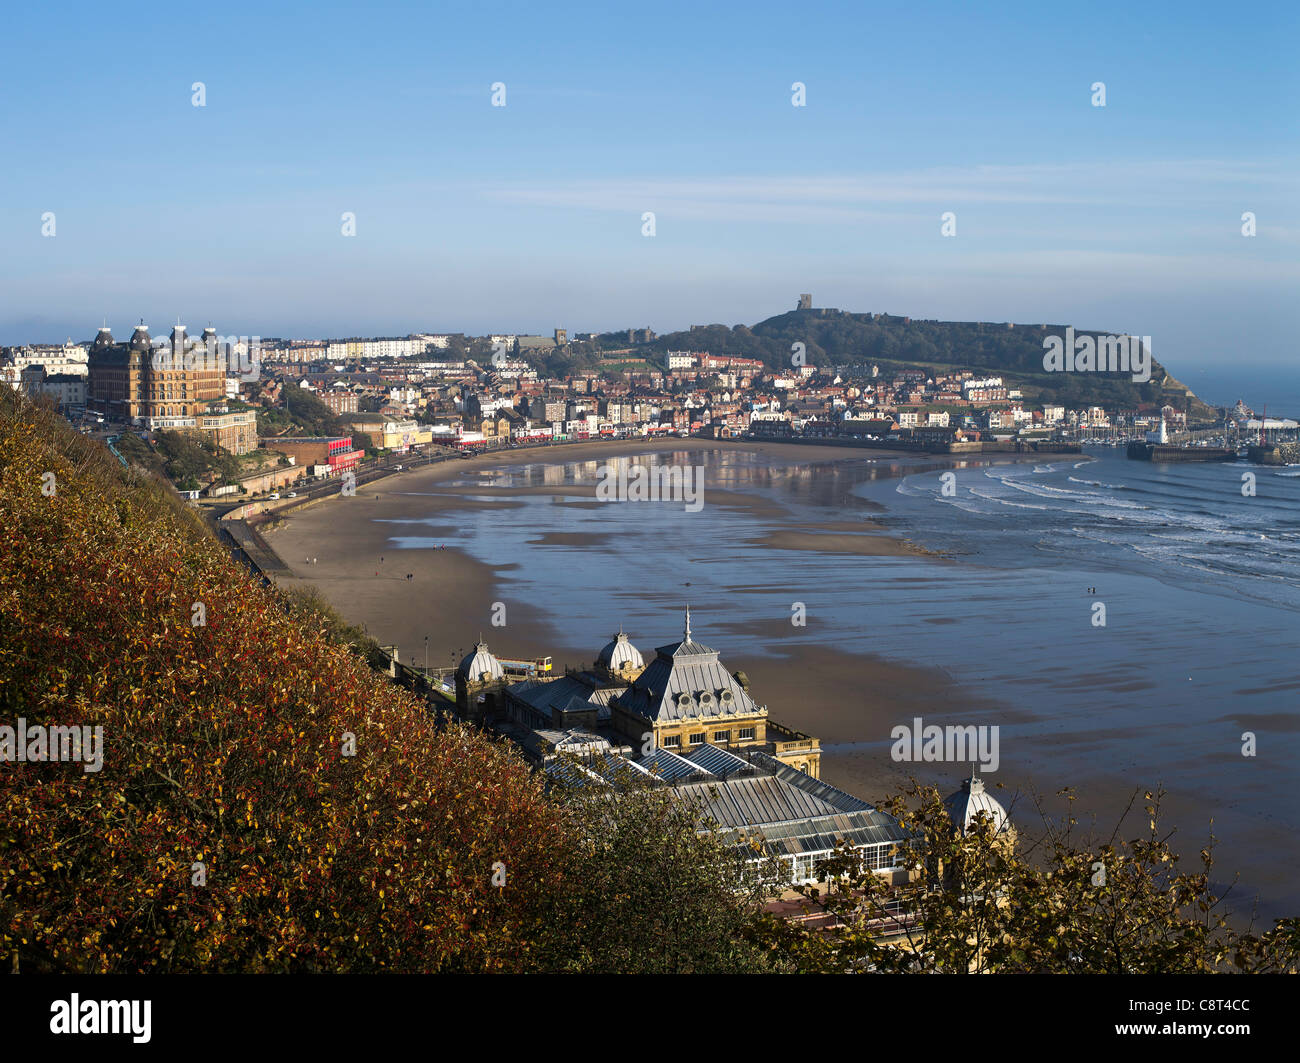 dh South Bay SCARBOROUGH NORTH YORKSHIRE English Seaside Beach Town bay Harbor e Spa autunnale Sea front resort uk costa Foto Stock